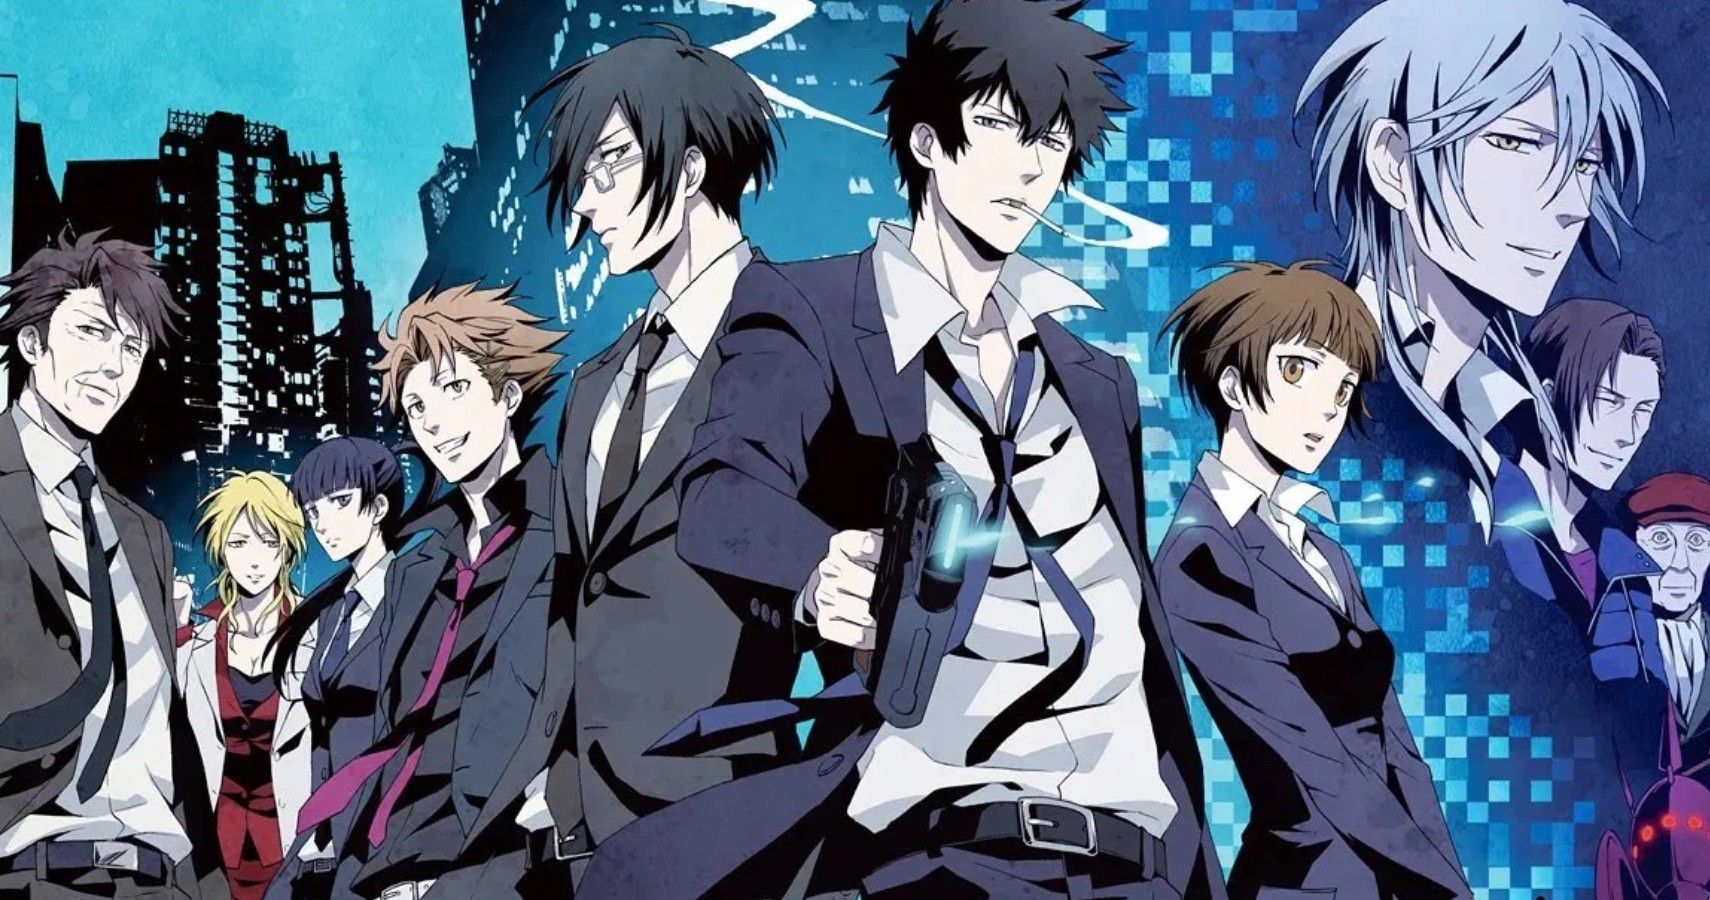 31 Of The Saddest Most Meaningful Psycho Pass Quotes That You Wont Soon  Forget